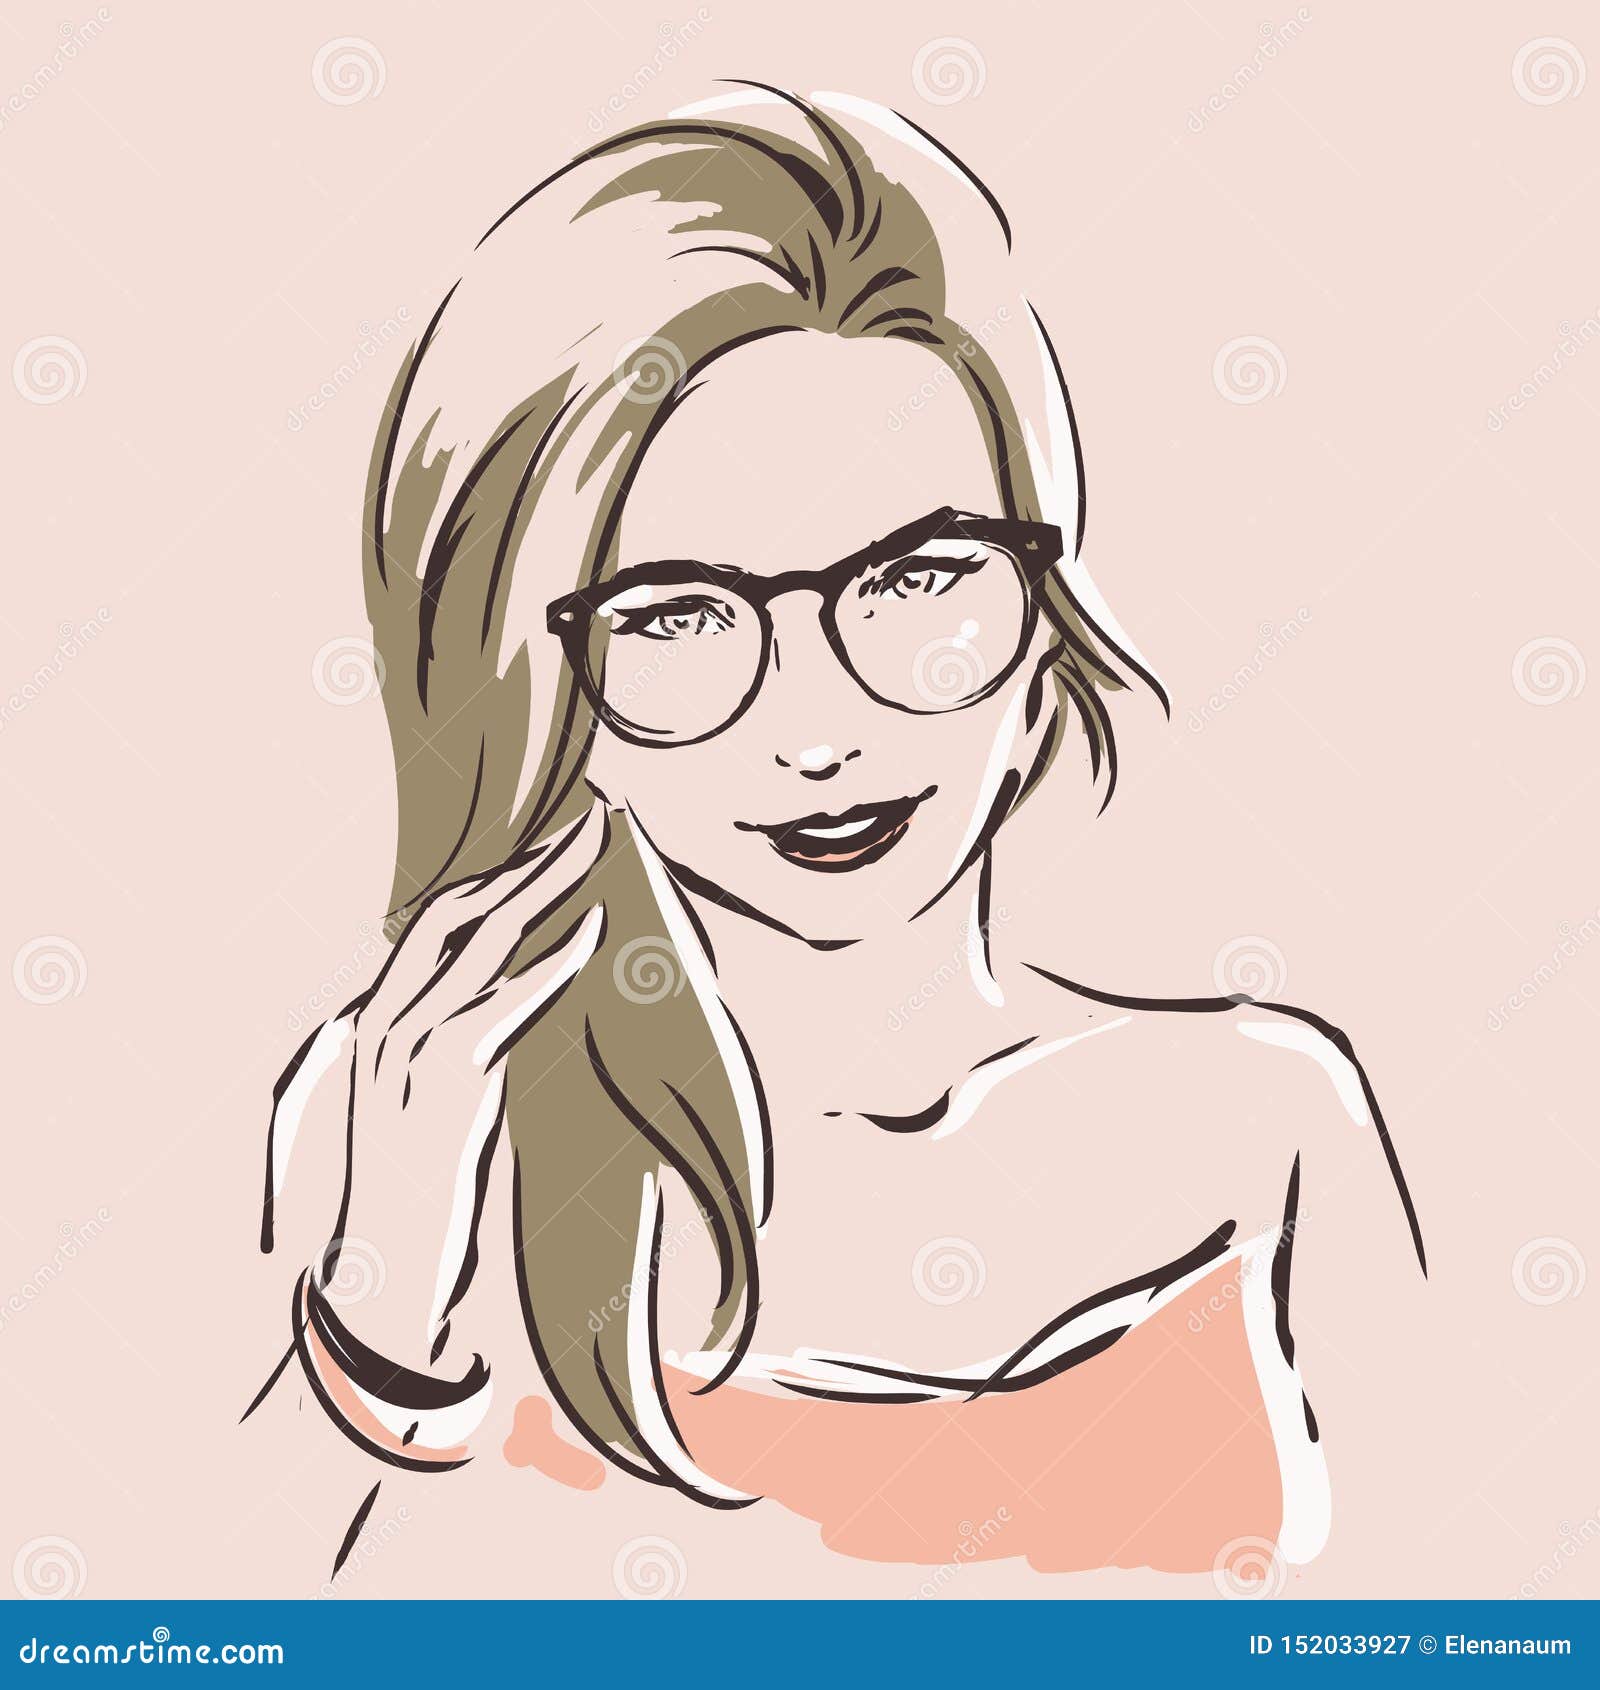 Woman Sketch, Pretty Face Stock Vector - Illustration of hair, glasses: 152033927